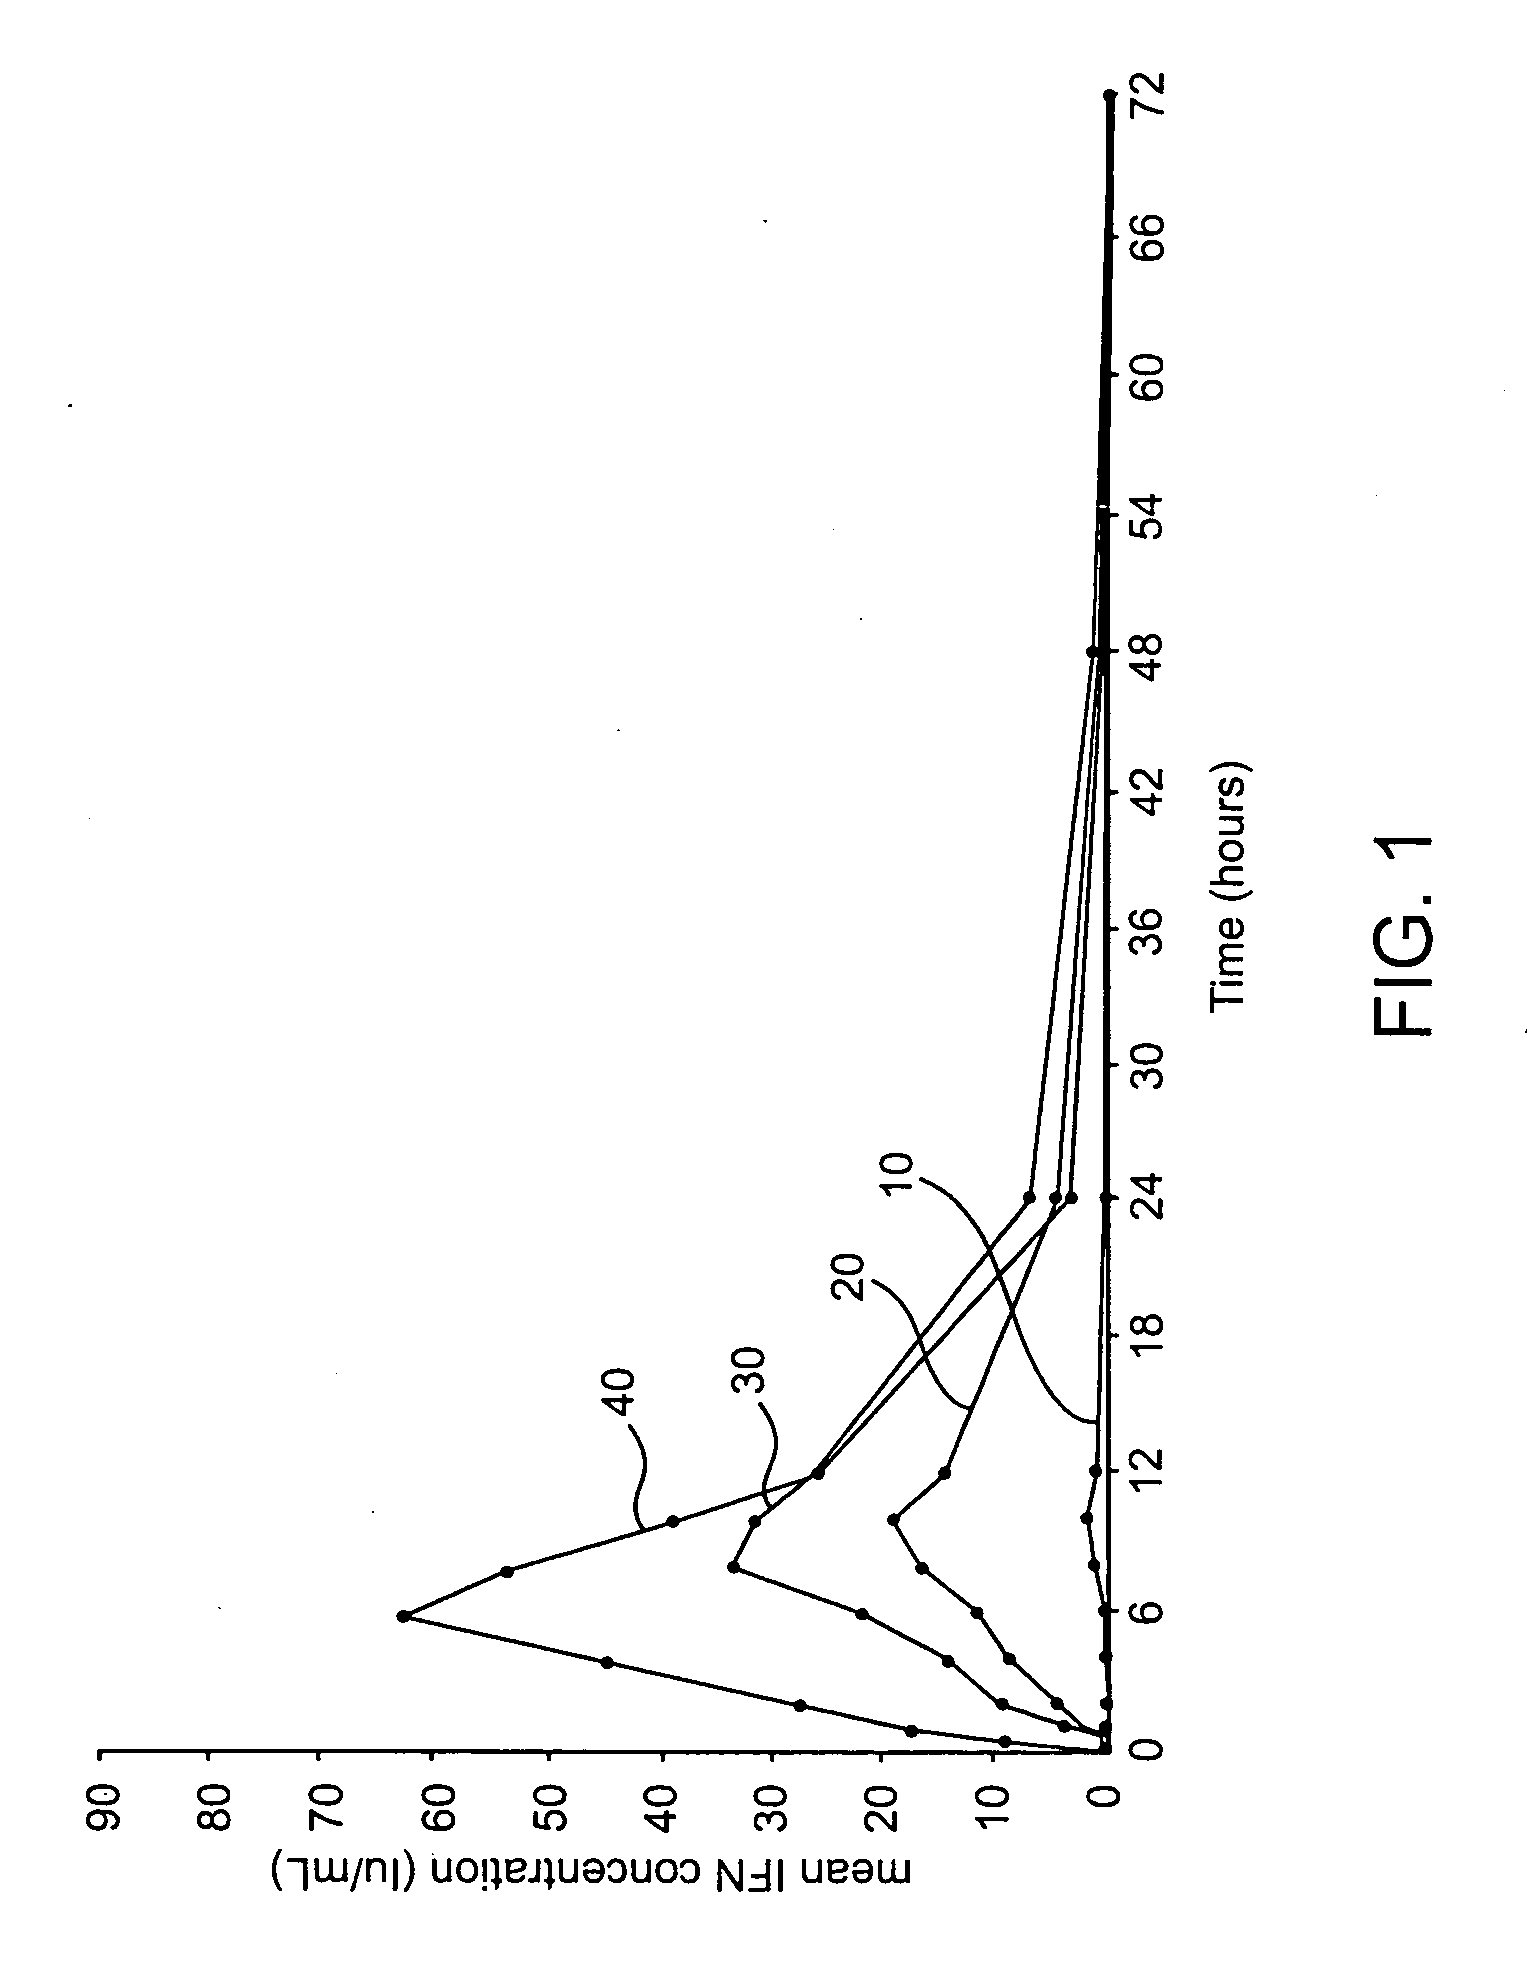 Compositions methods and systems for pulmonary delivery of recombinant human interferon alpha-2b